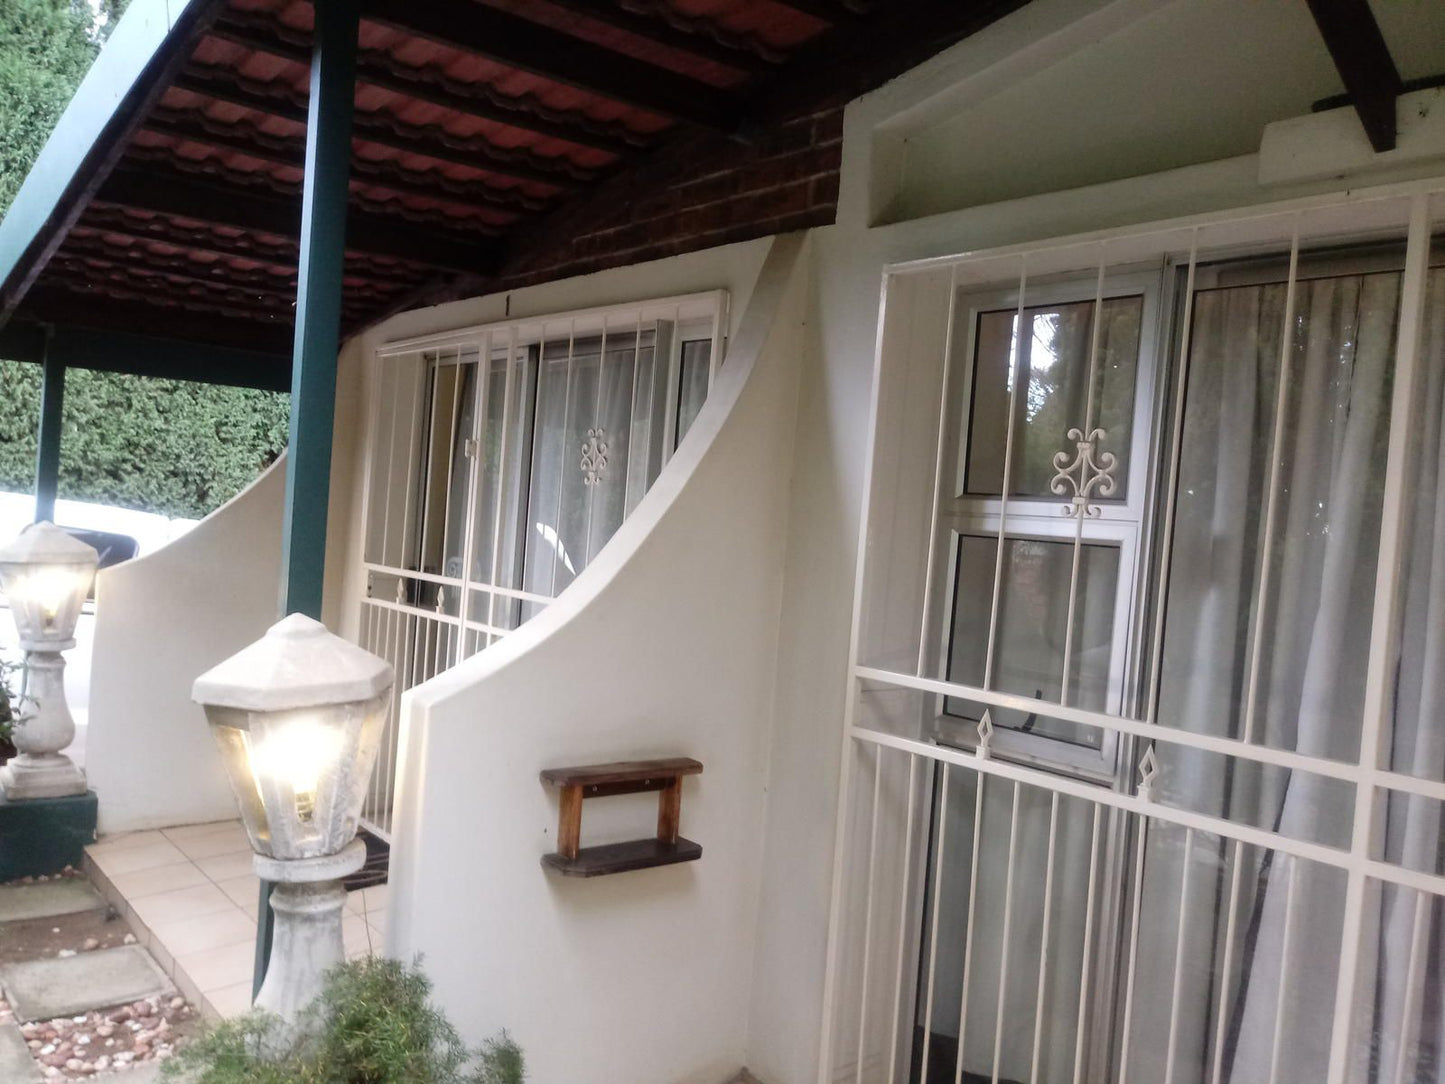 Nmb Guest House Ermelo Mpumalanga South Africa Unsaturated, Balcony, Architecture, House, Building